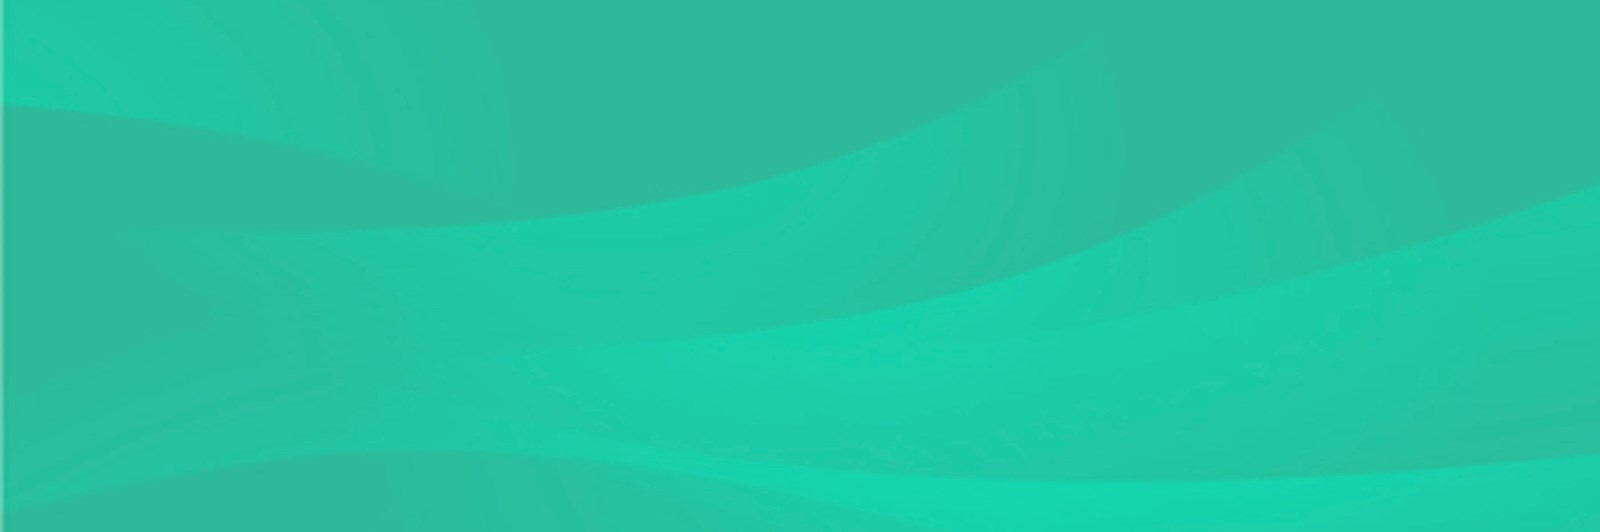 Teal abstract background